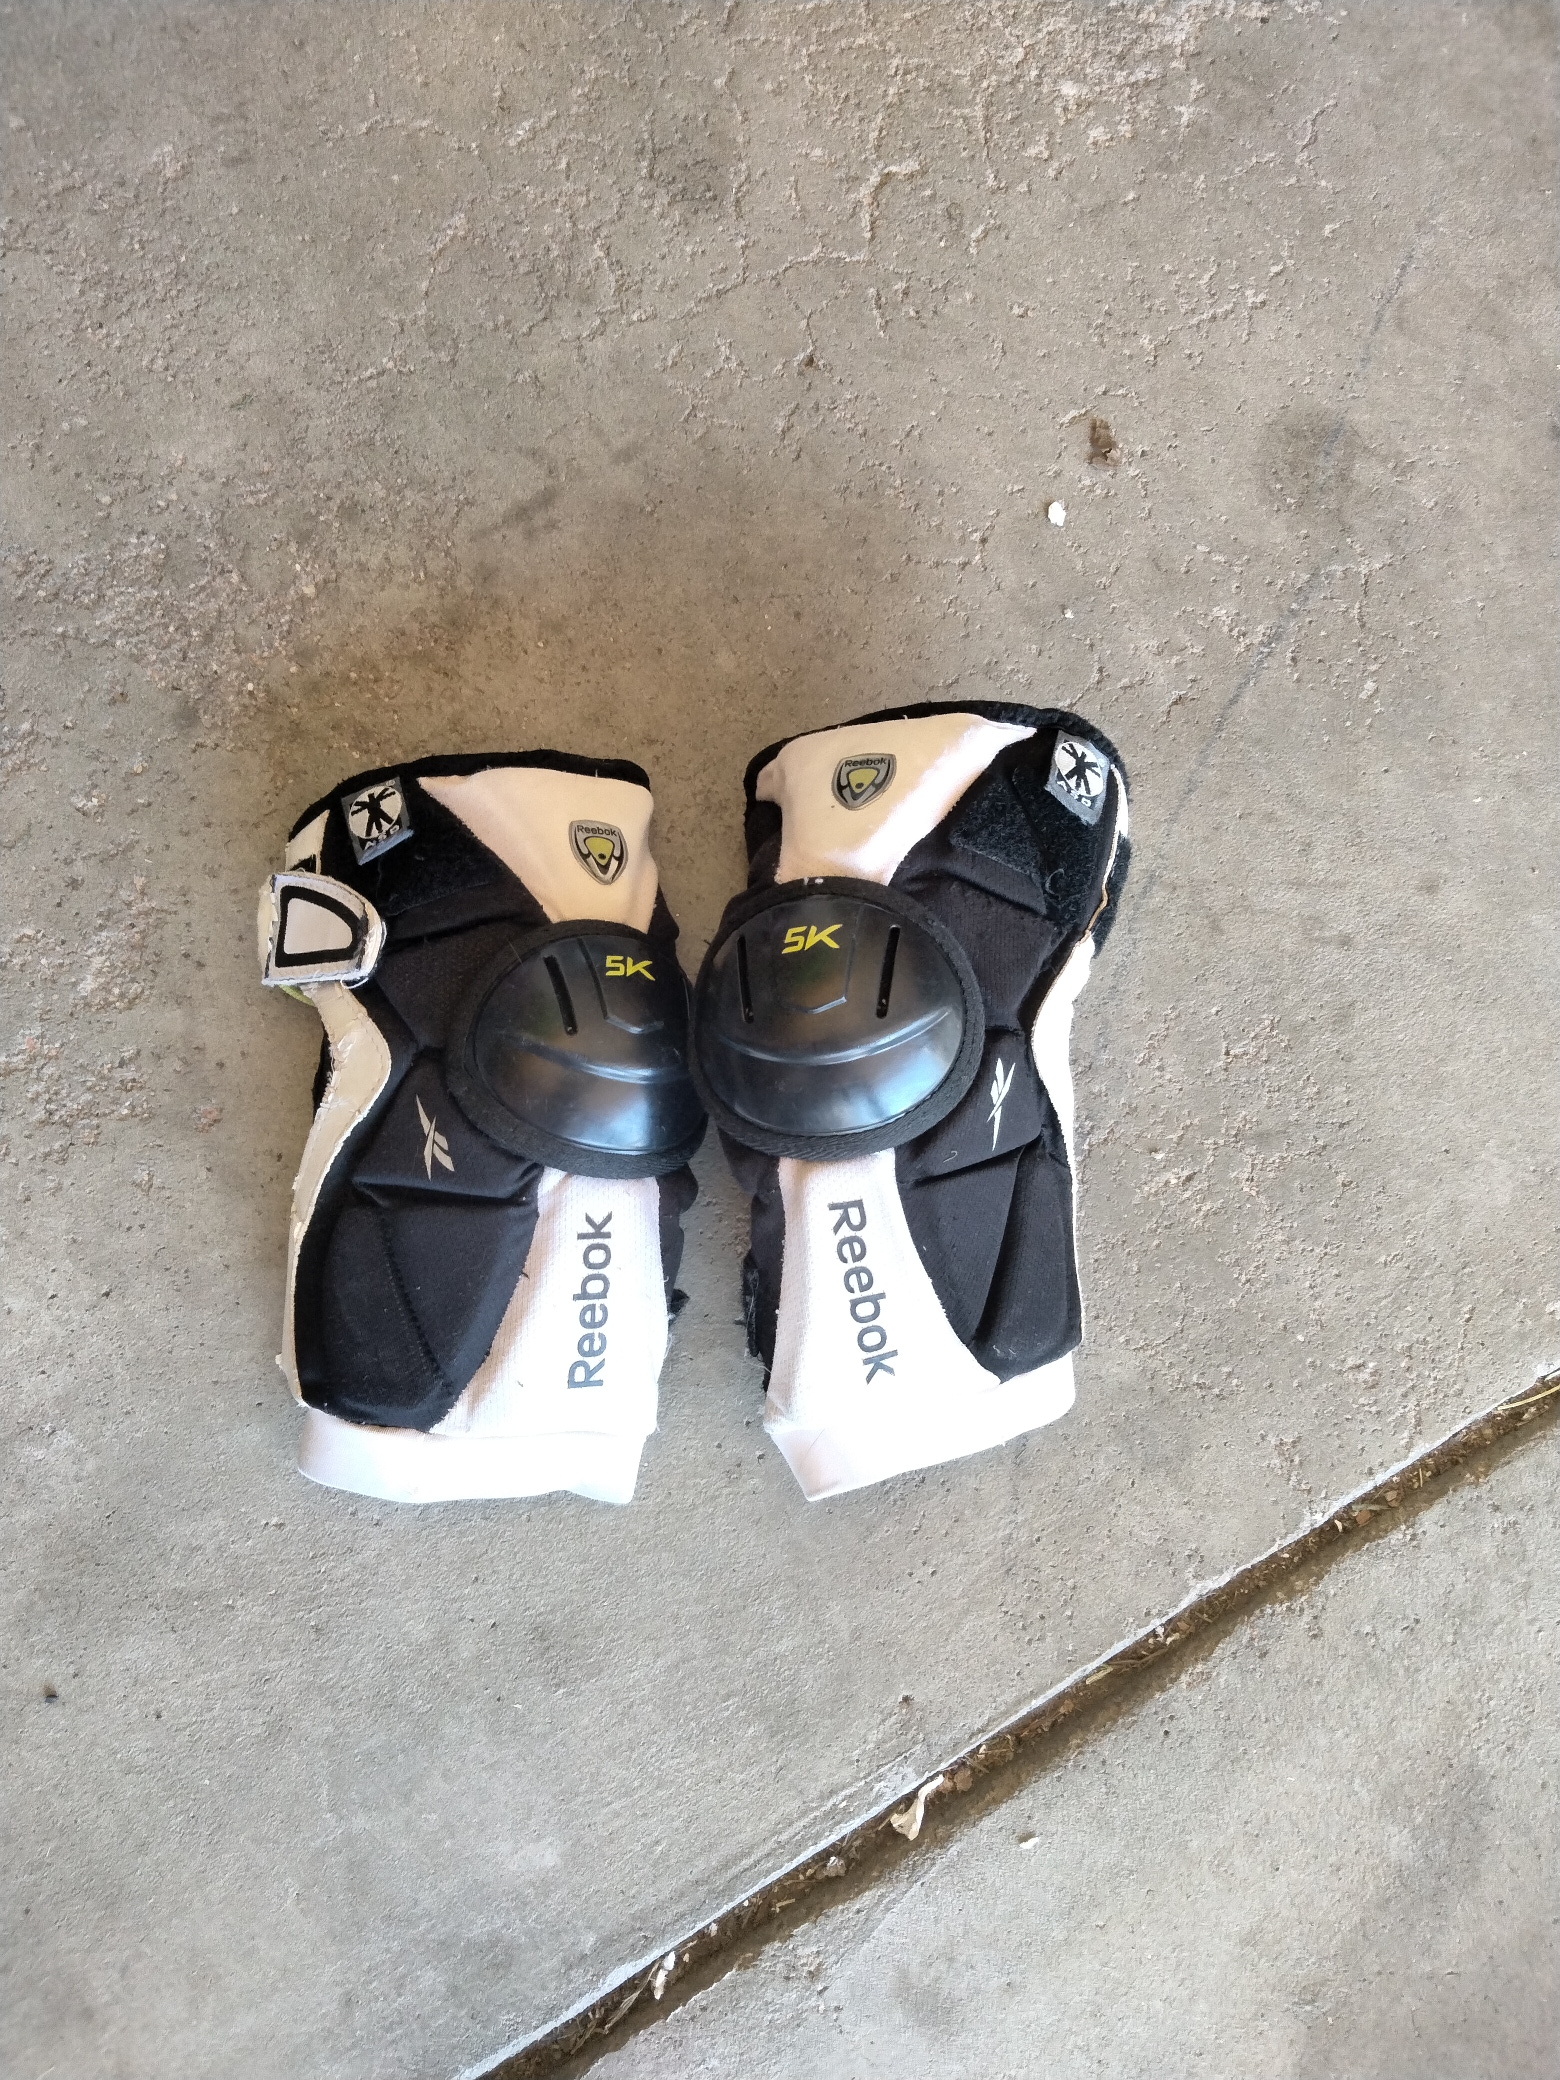 Used Youth Small Reebok 5K Arm Pads